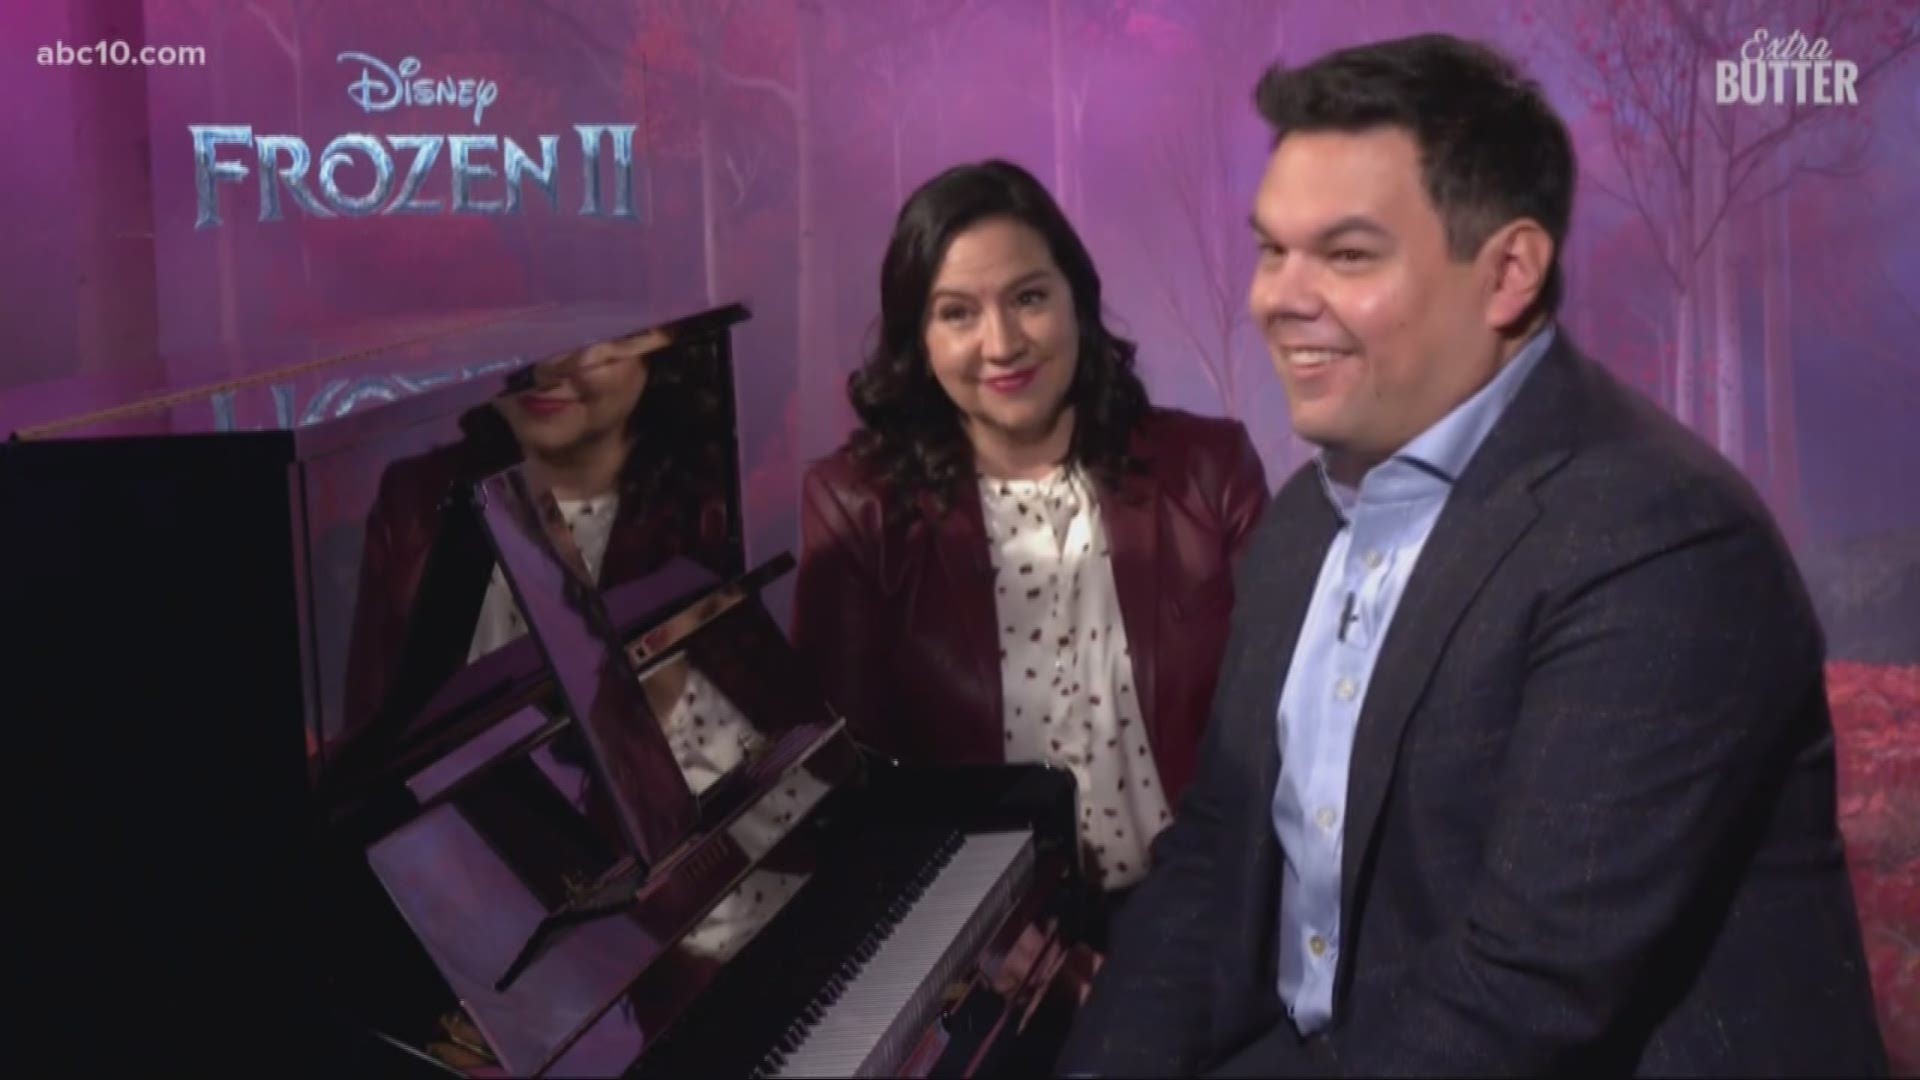 Mark S. Allen spoke with the "Frozen" songwriters, Robert and Kristin Lopez, about their inspiration for writing award-winning music like "Let it go."